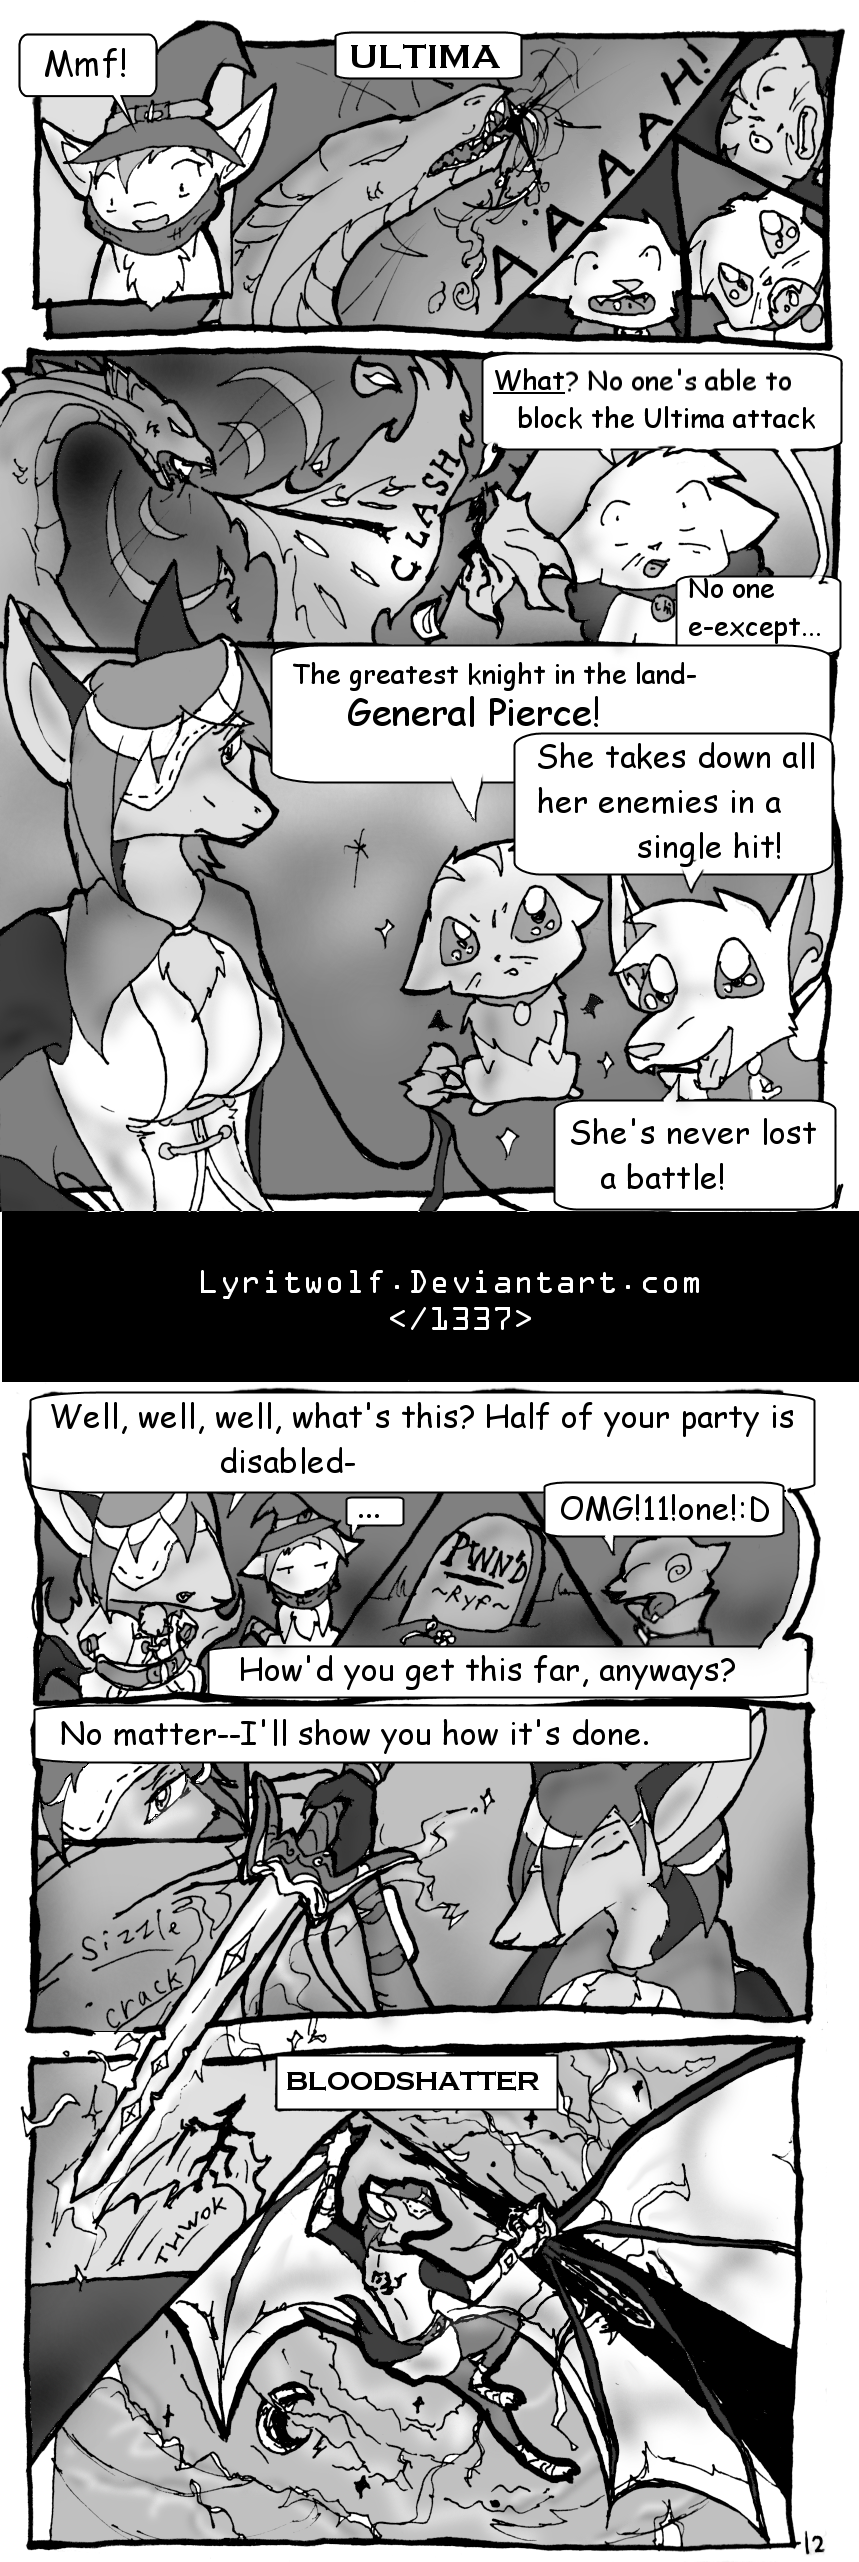 Final Furtasy - Pages 11-12 by Defiance